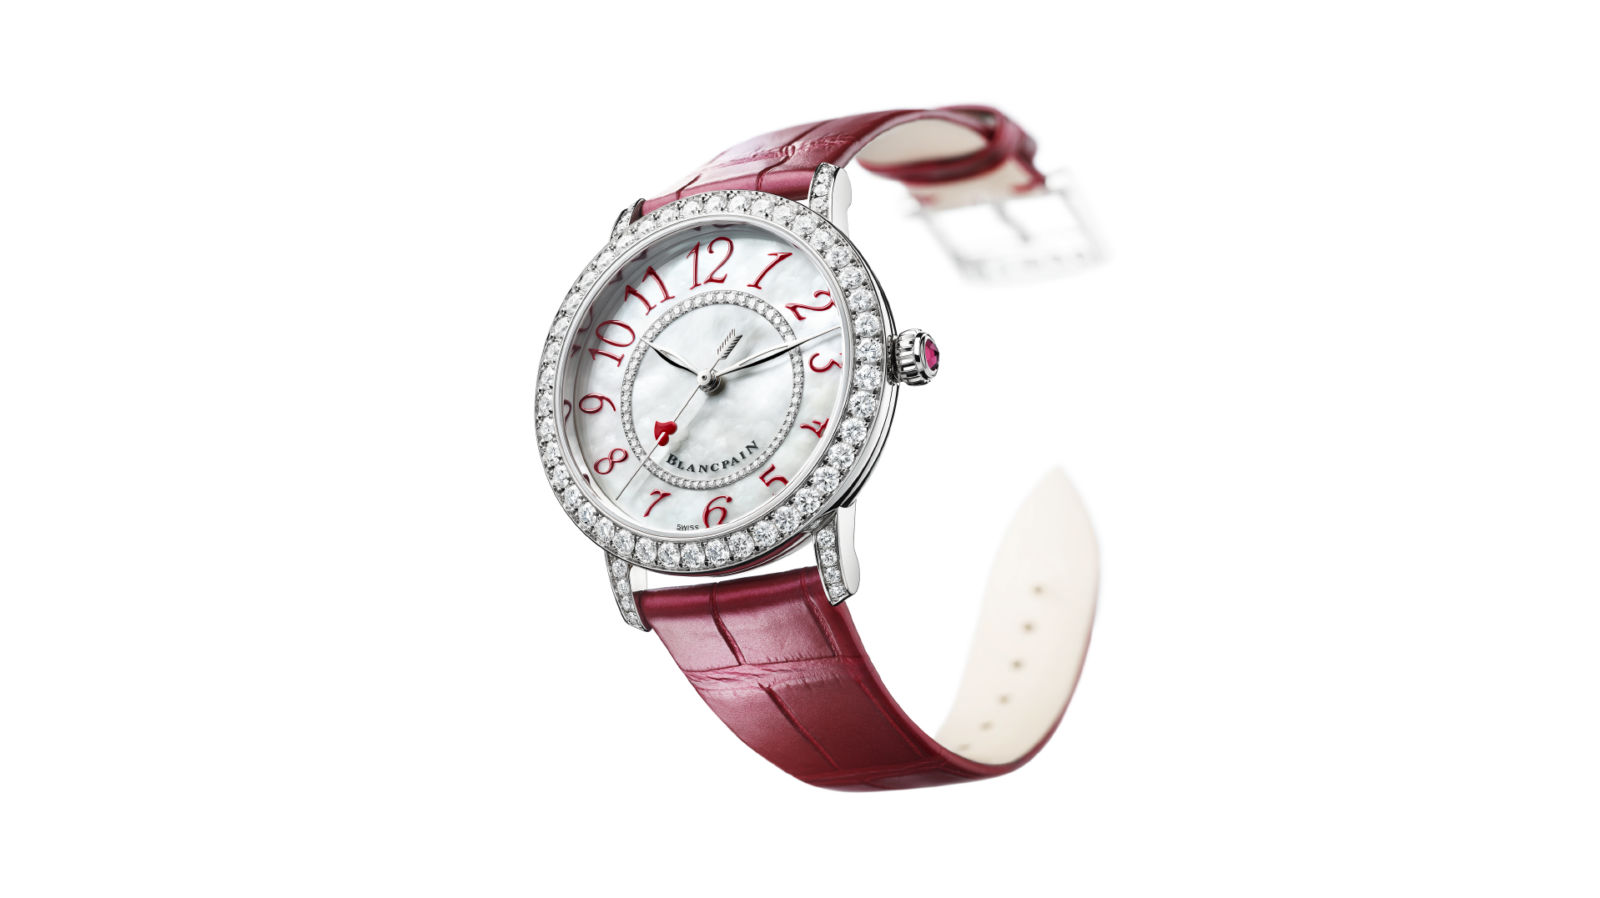 Valentine’s Day 2022: Blancpain’s love-themed Ladybird sweeps a fiery heart across its dial